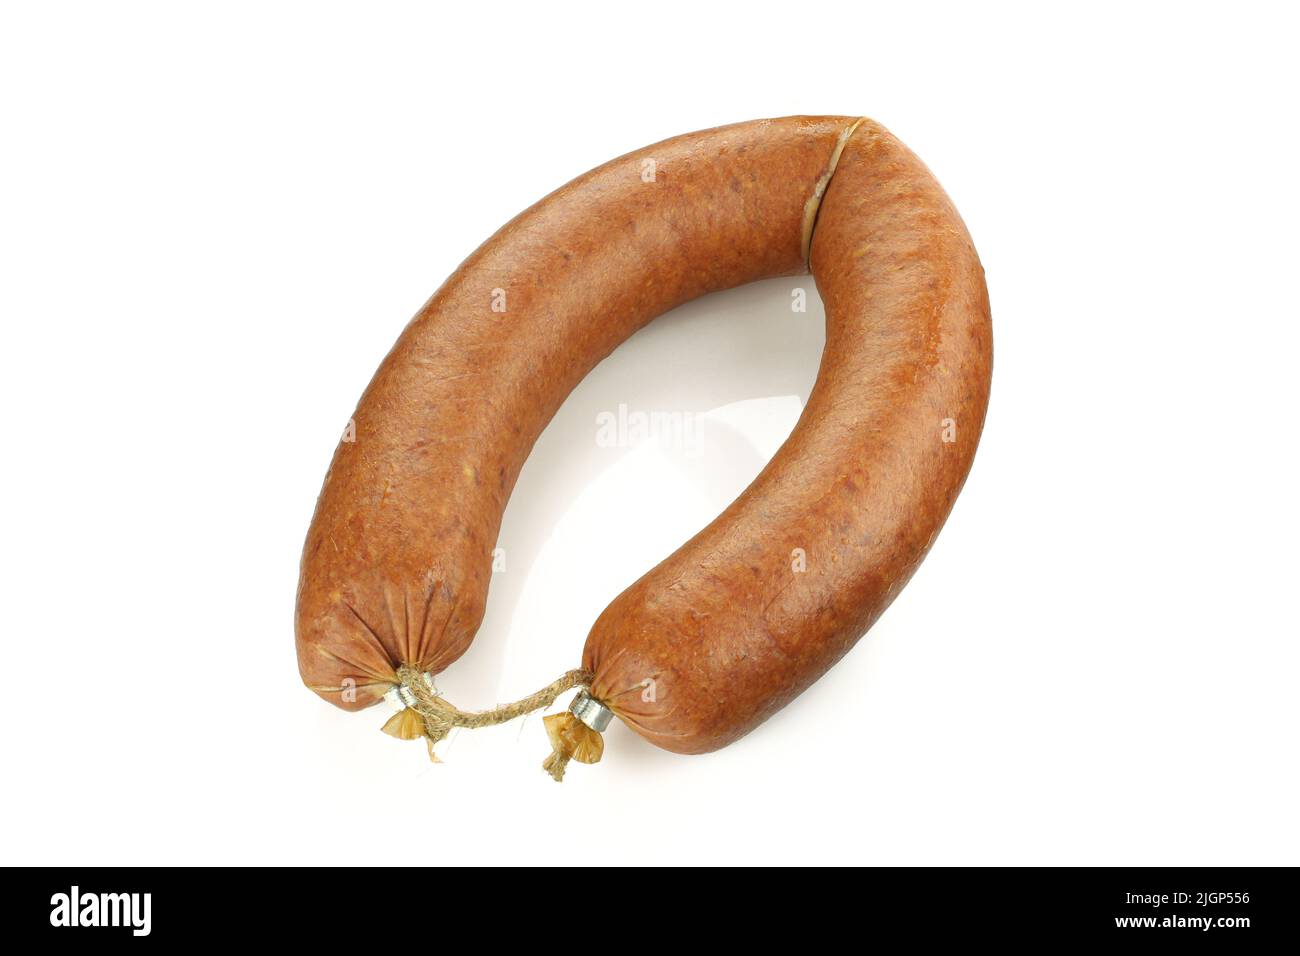 Jaegerwurst. Dried, smoked and baked beef sausage isolated on white background Stock Photo